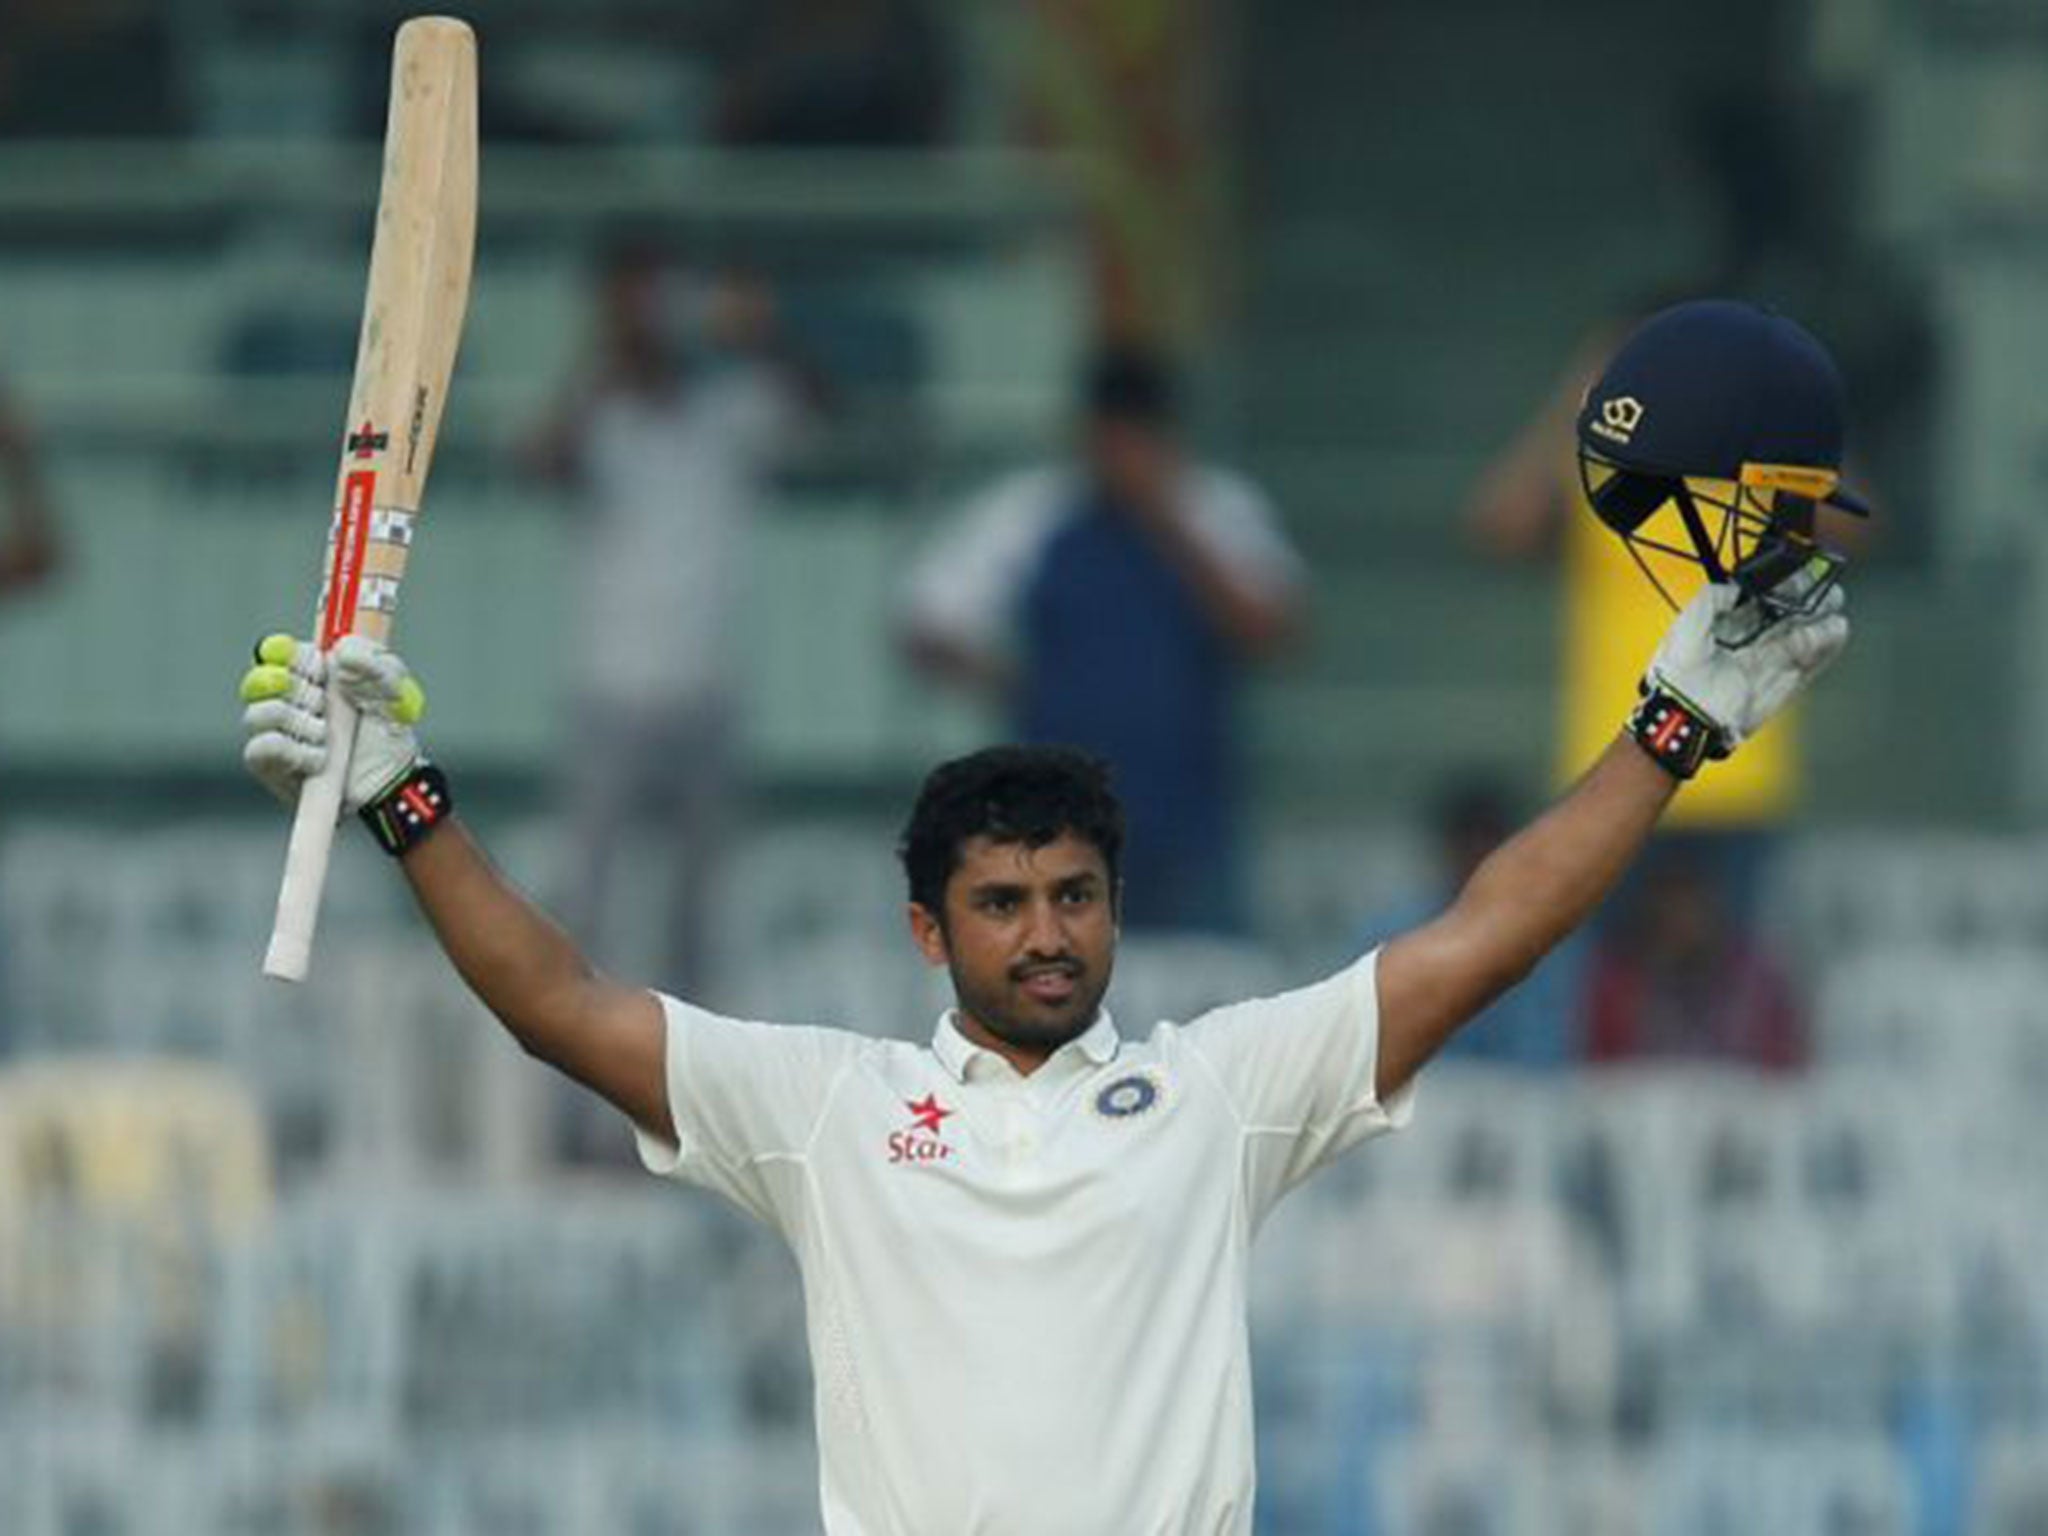 Karun Nair is a product of India taking the game of cricket out of the major cities and across the country